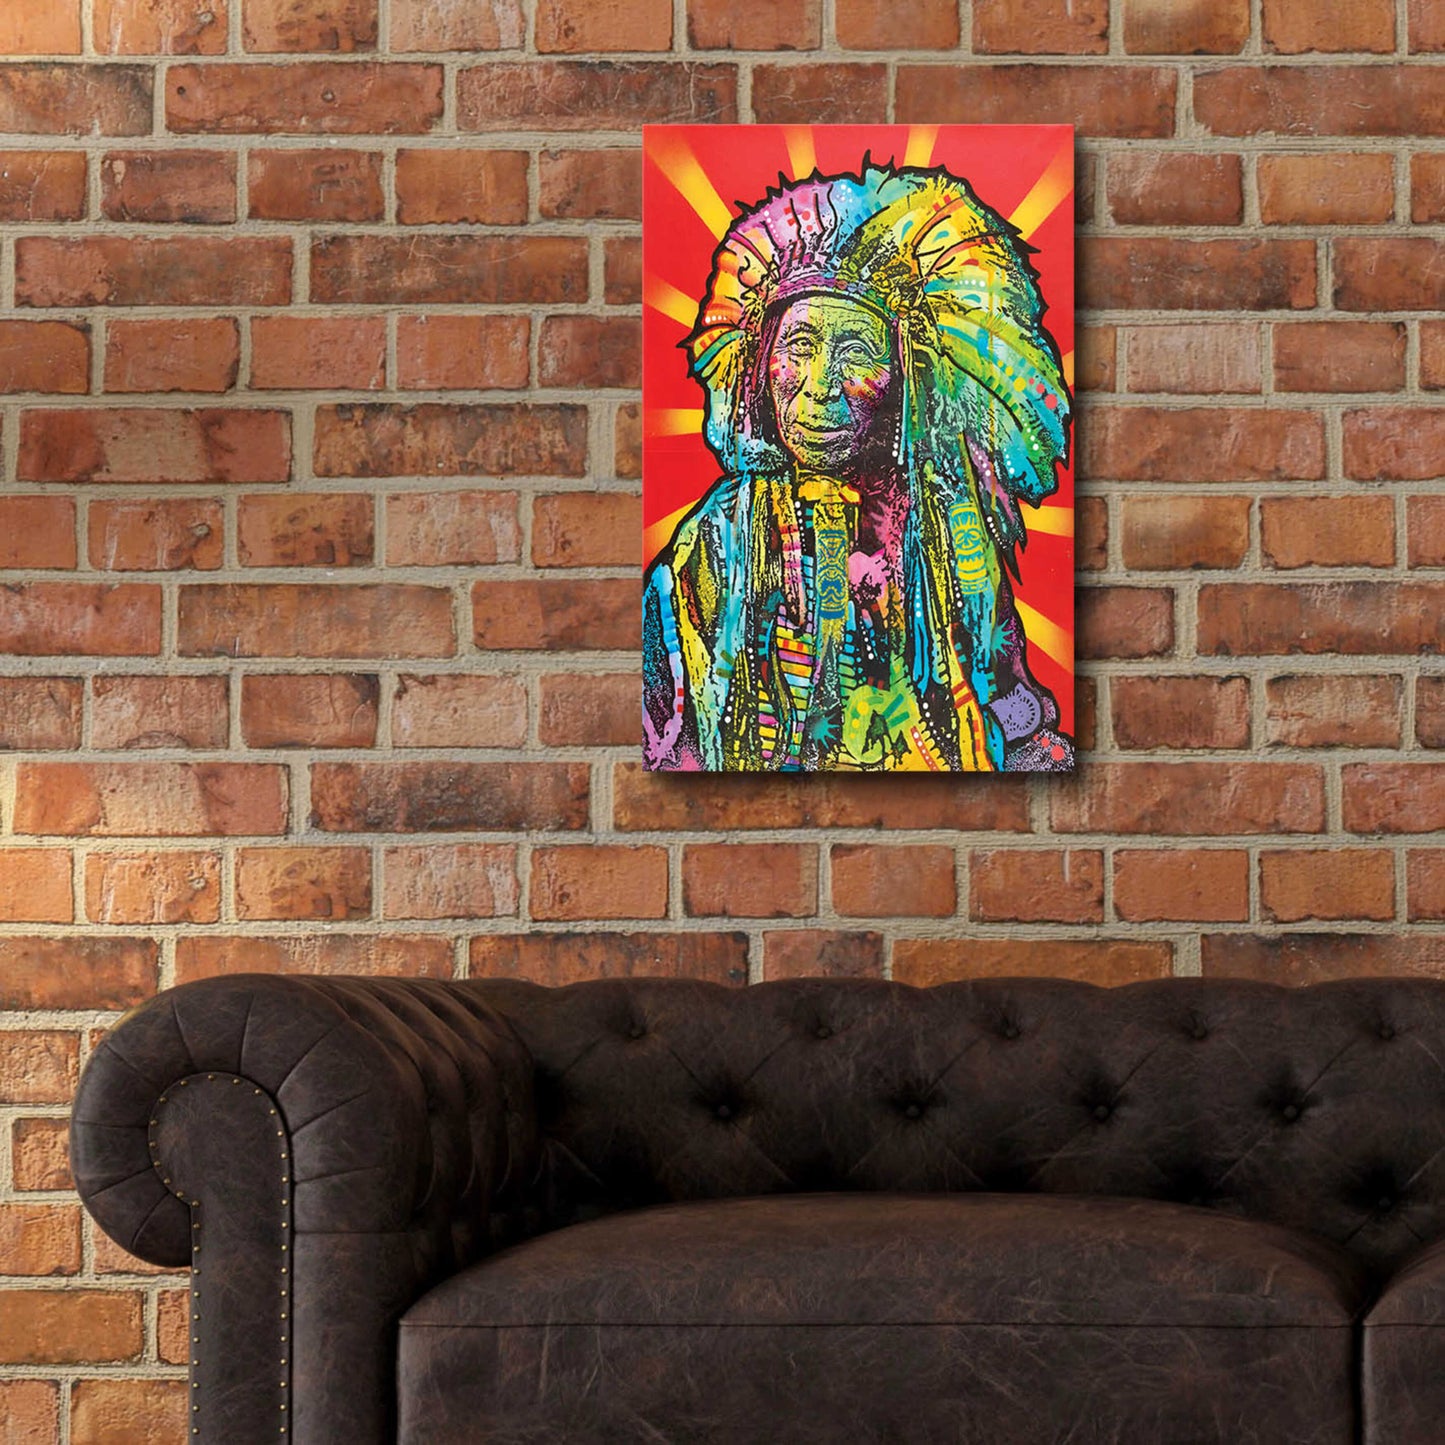 Epic Art 'Native American I' by Dean Russo, Acrylic Glass Wall Art,16x24